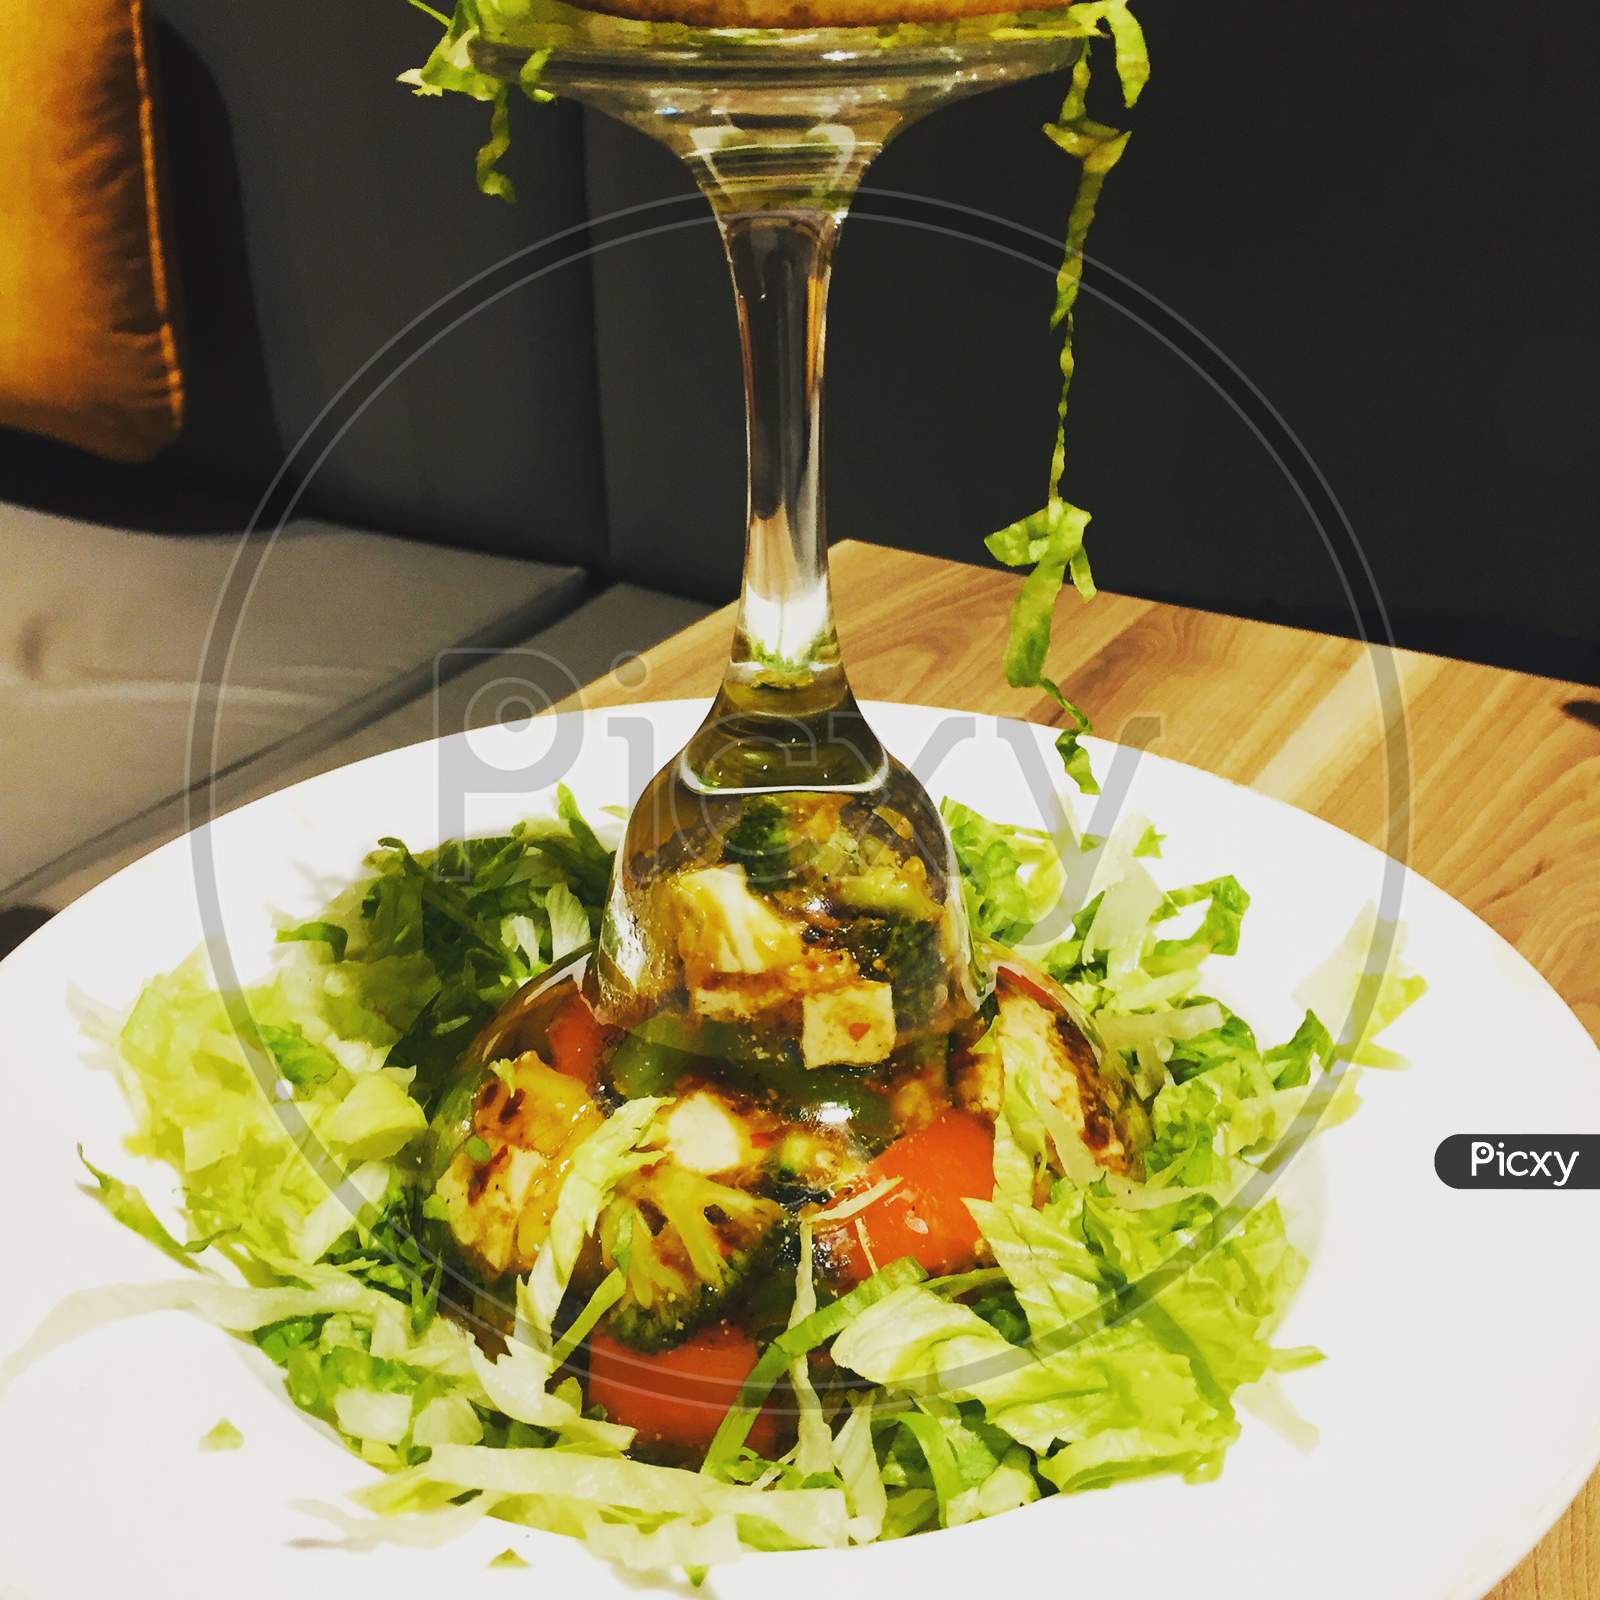 Glass full of Salad to a healthy lifestyle